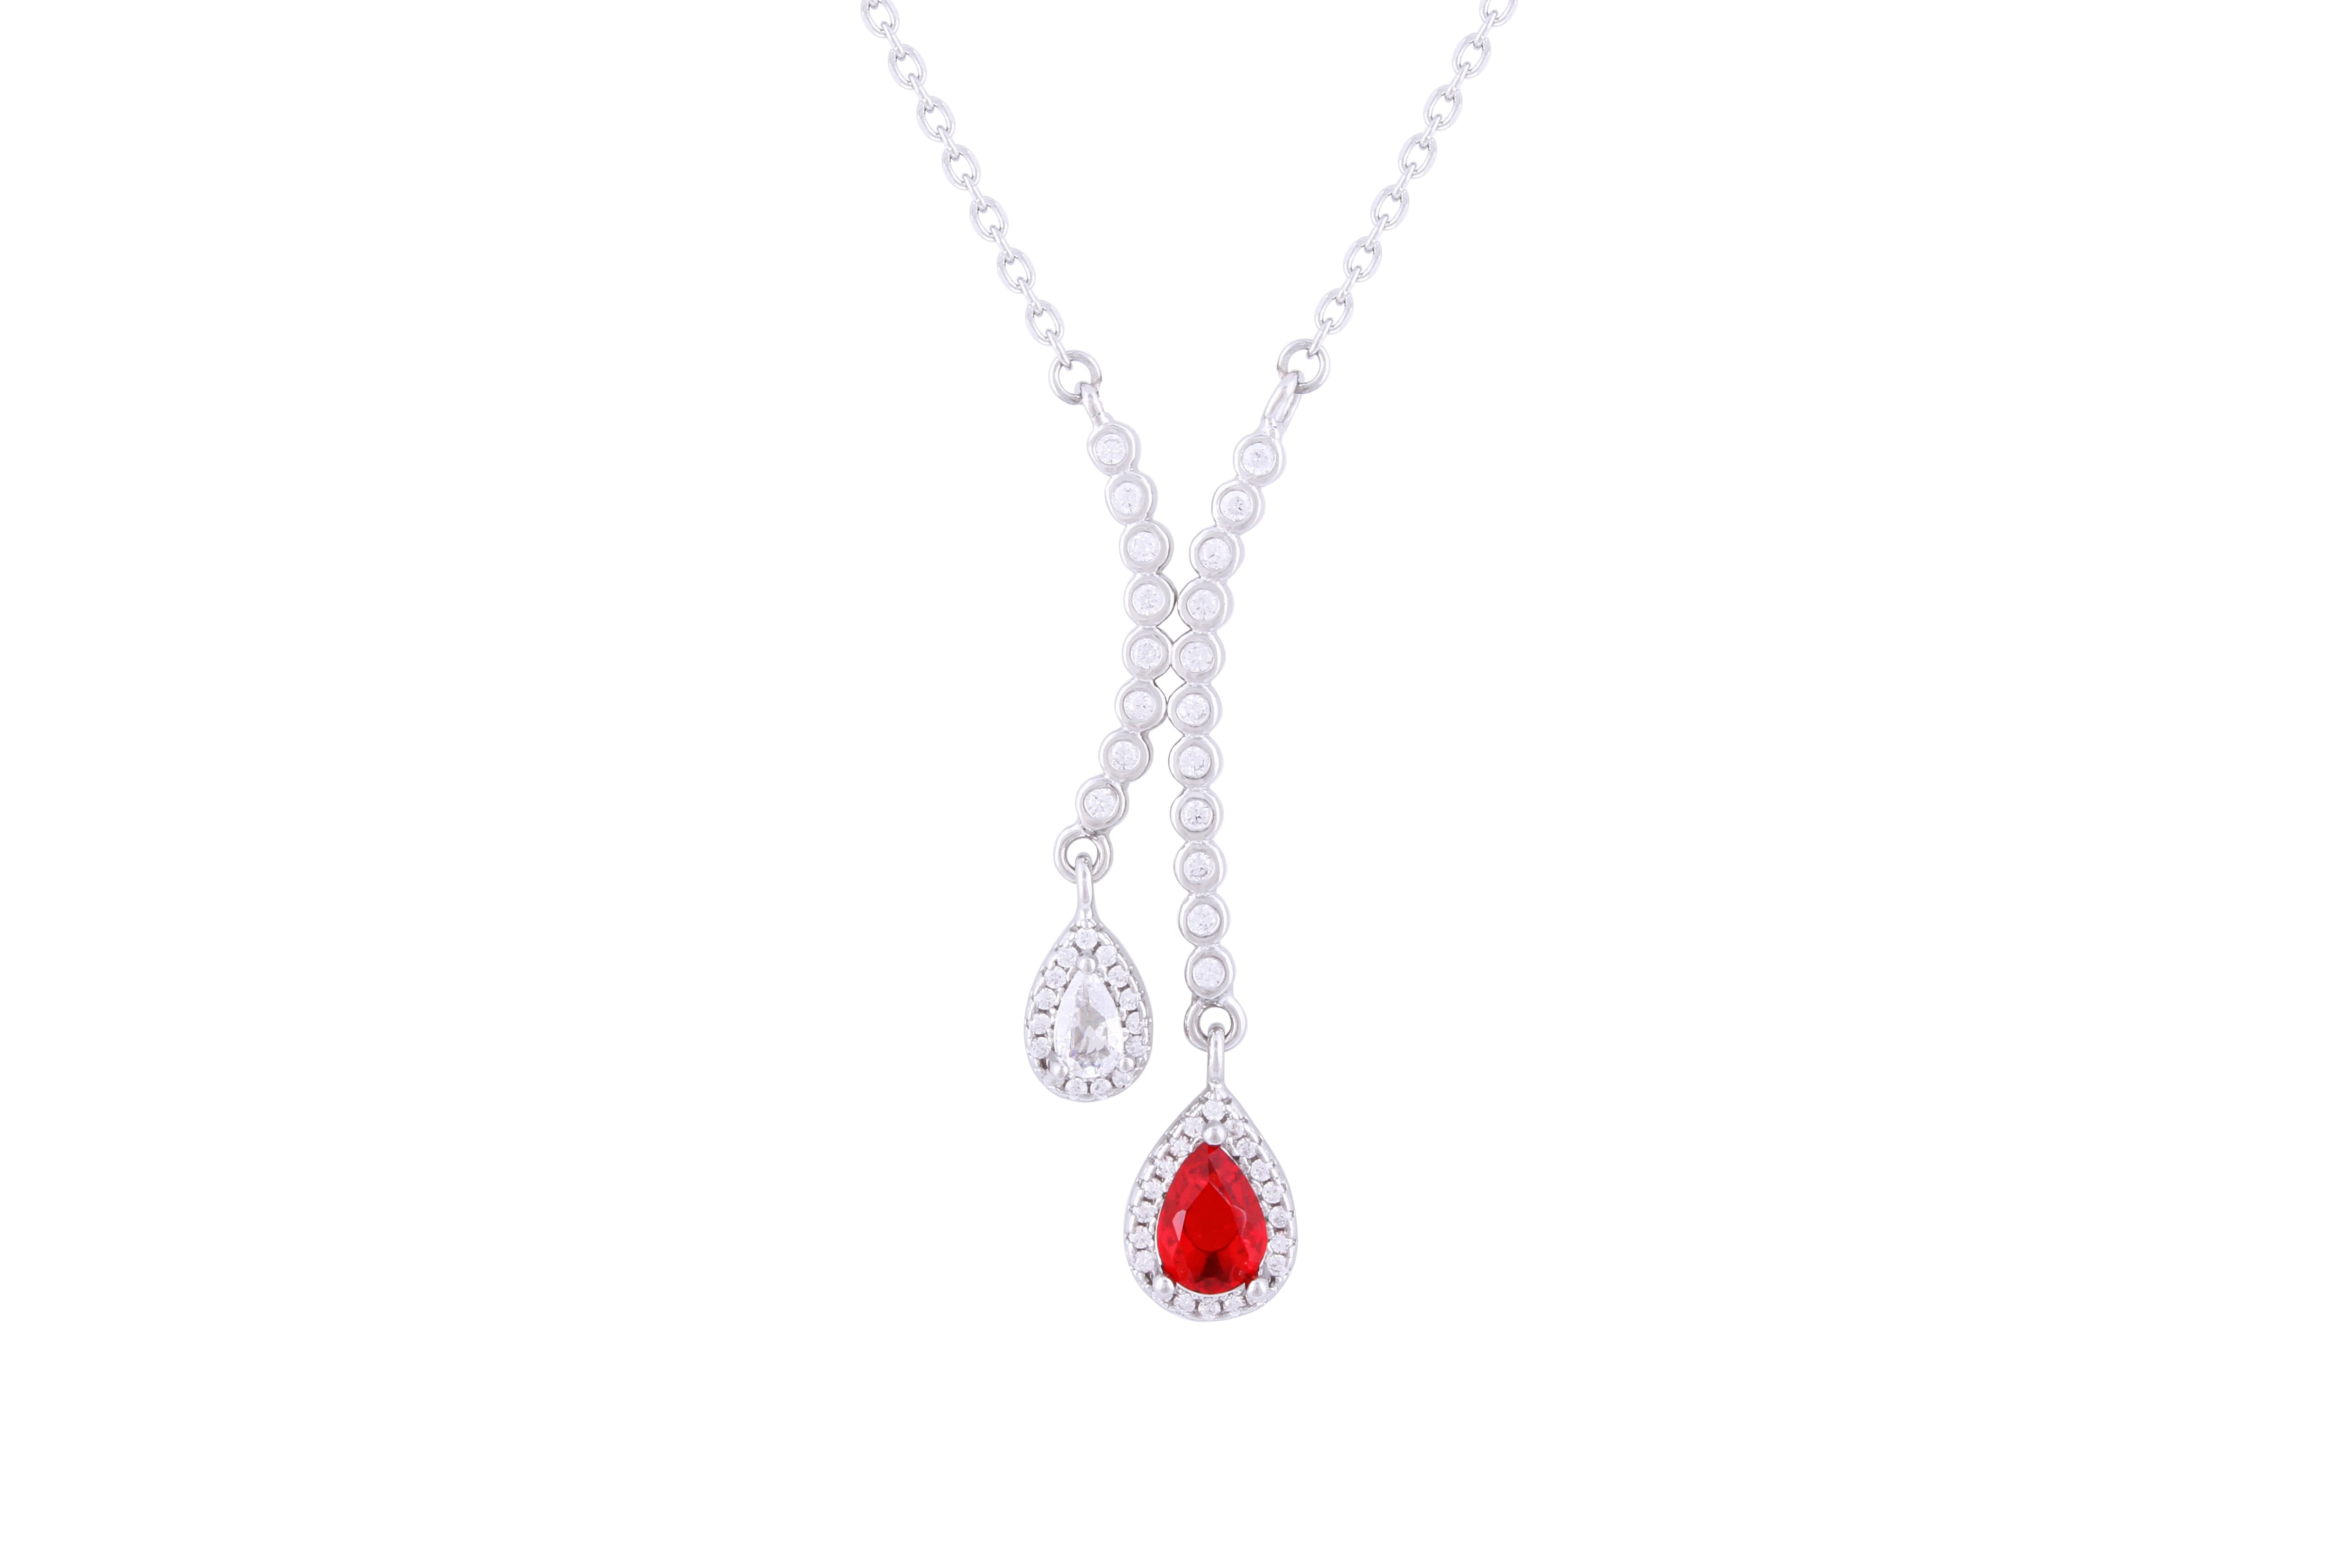 Asfour 925 Sterling Silver Necklace Inlaid With Red Pear Stone NR0497-WR